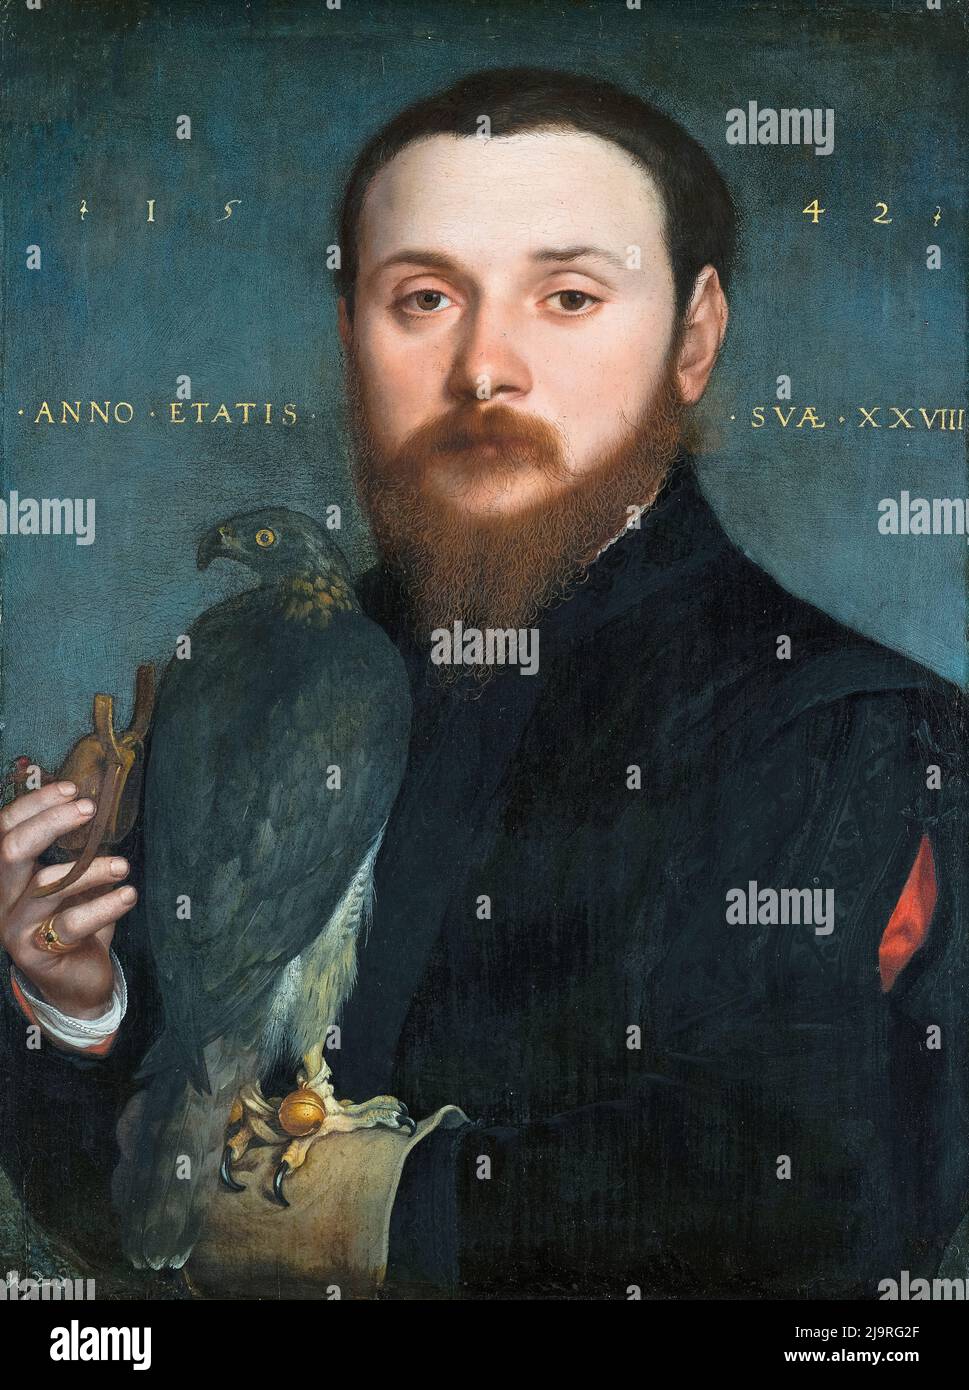 Hans Holbein the Younger, Portrait of a Nobleman with a Hawk, painting in oil on panel, 1542 Stock Photo